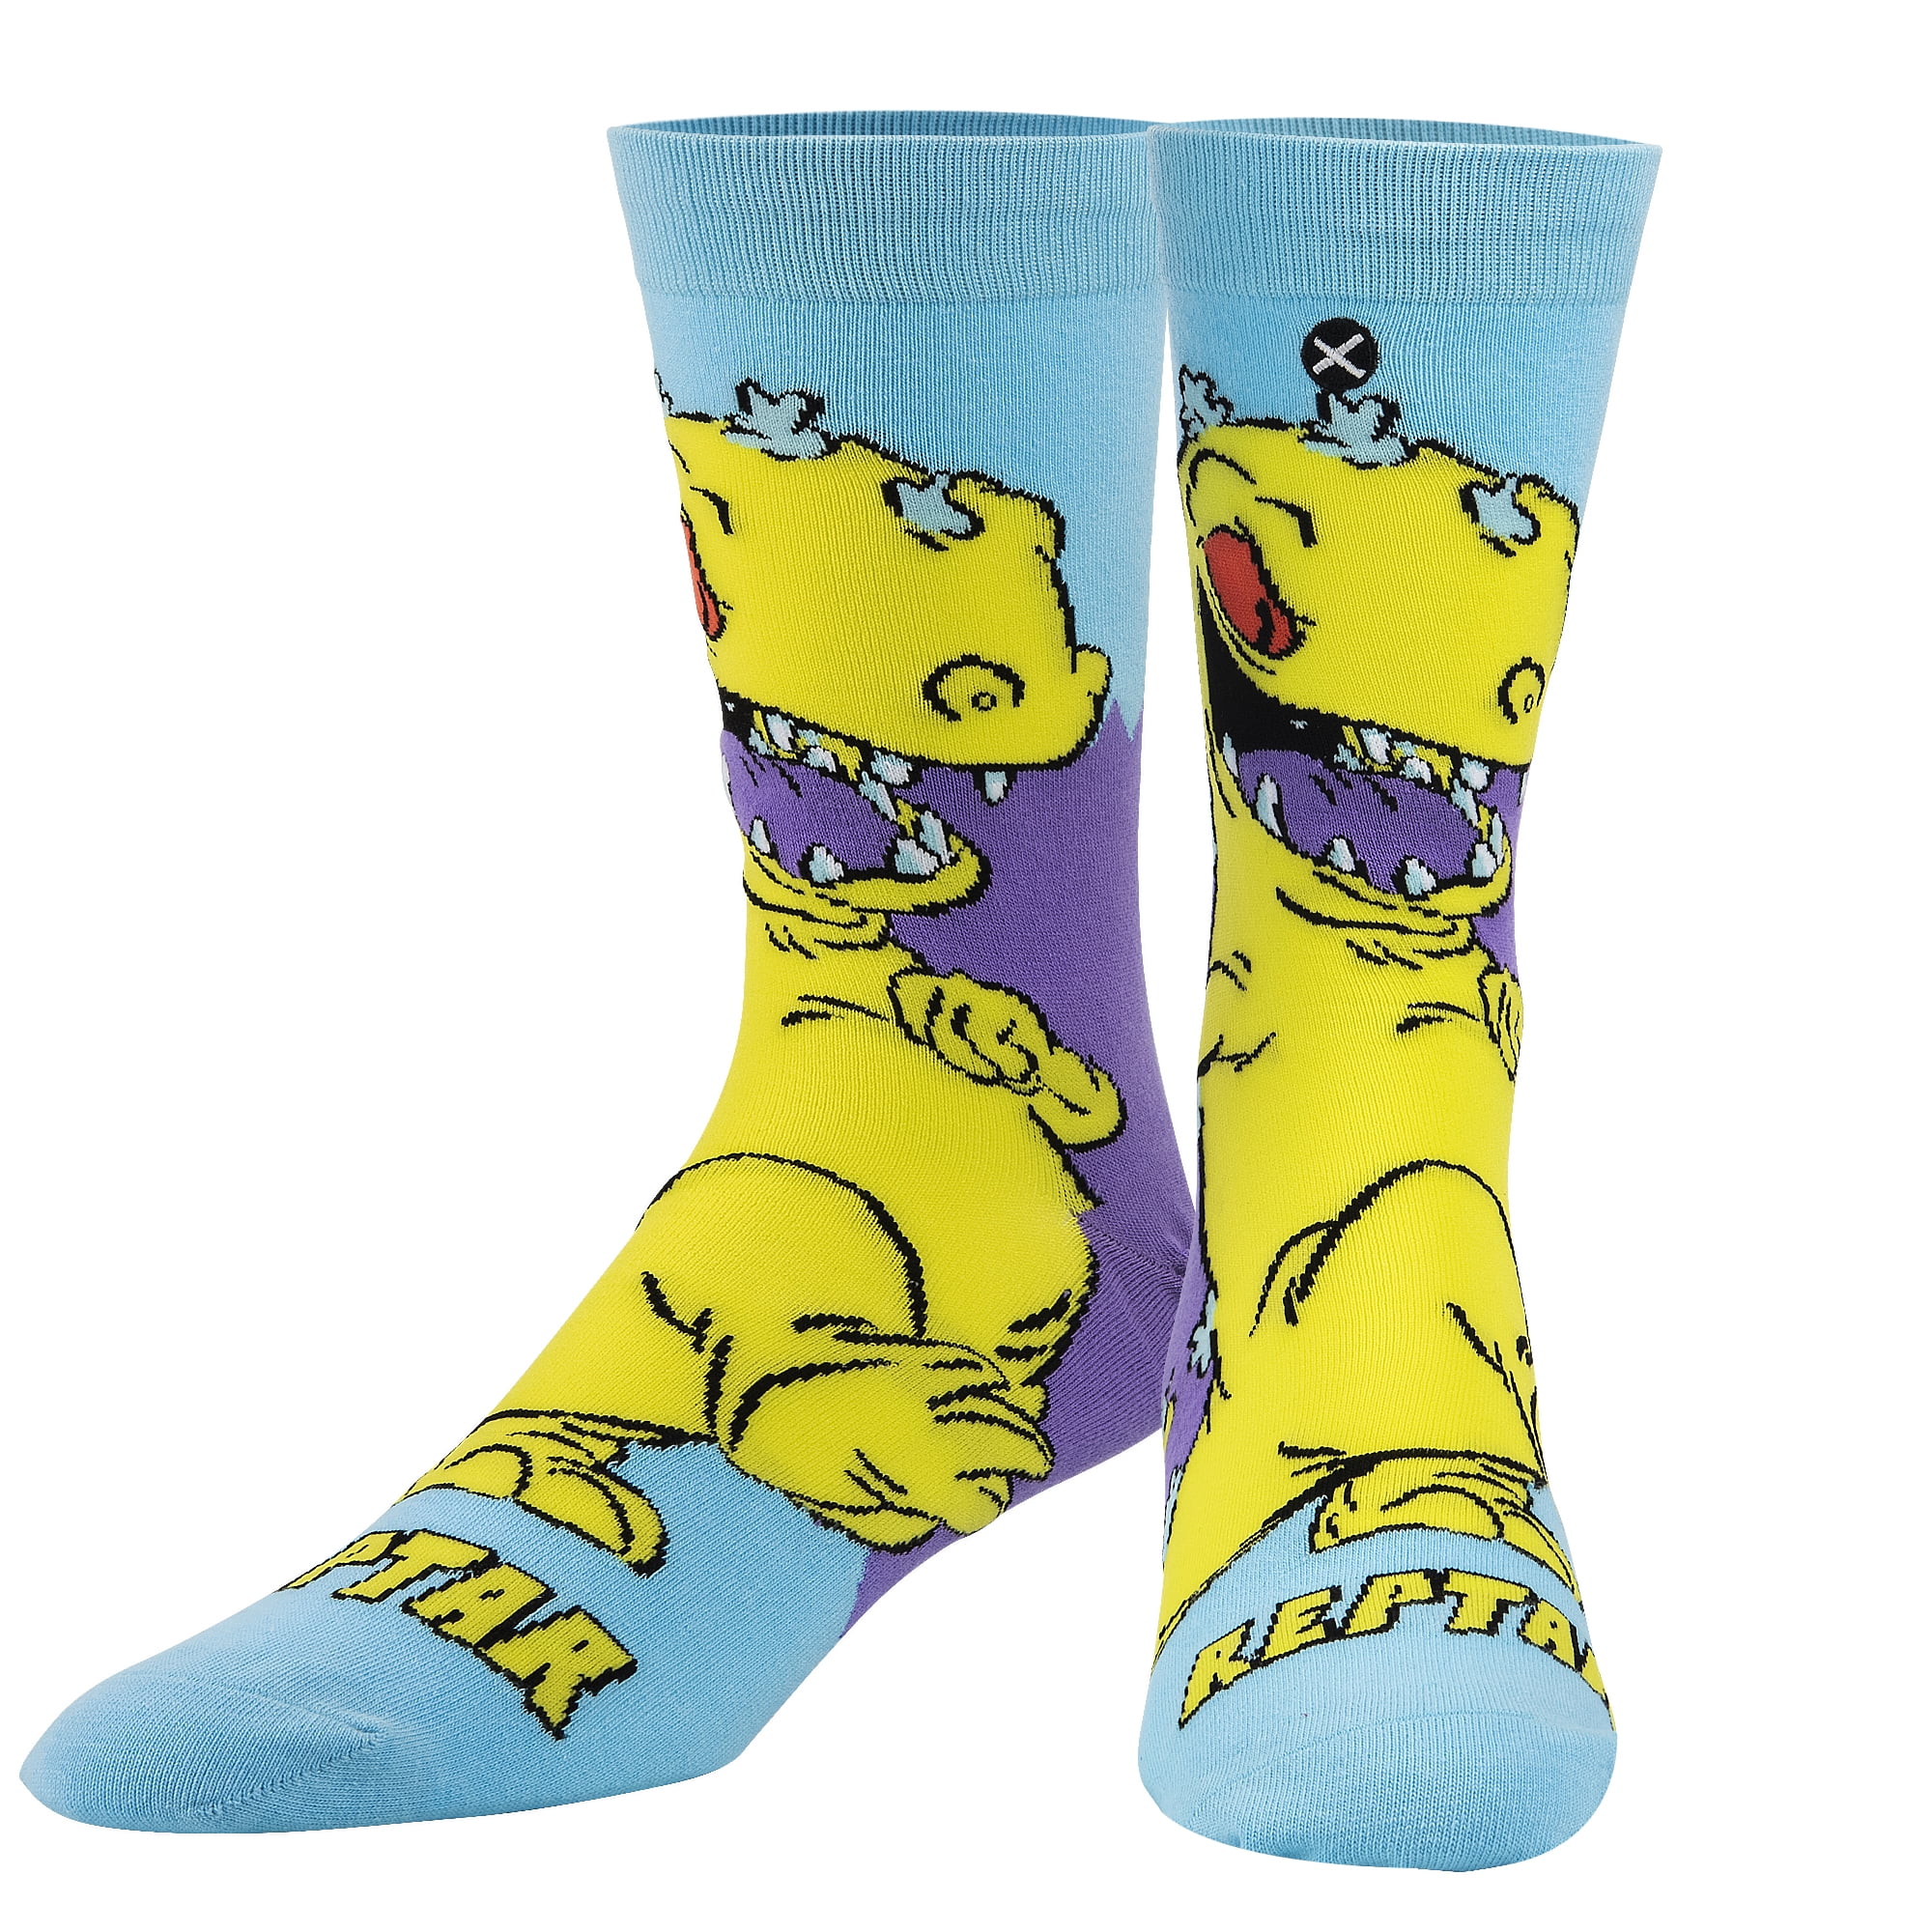 New Rugrats Mens Novelty Crew Socks With REPTAR Nickelodeon Size 6-12 